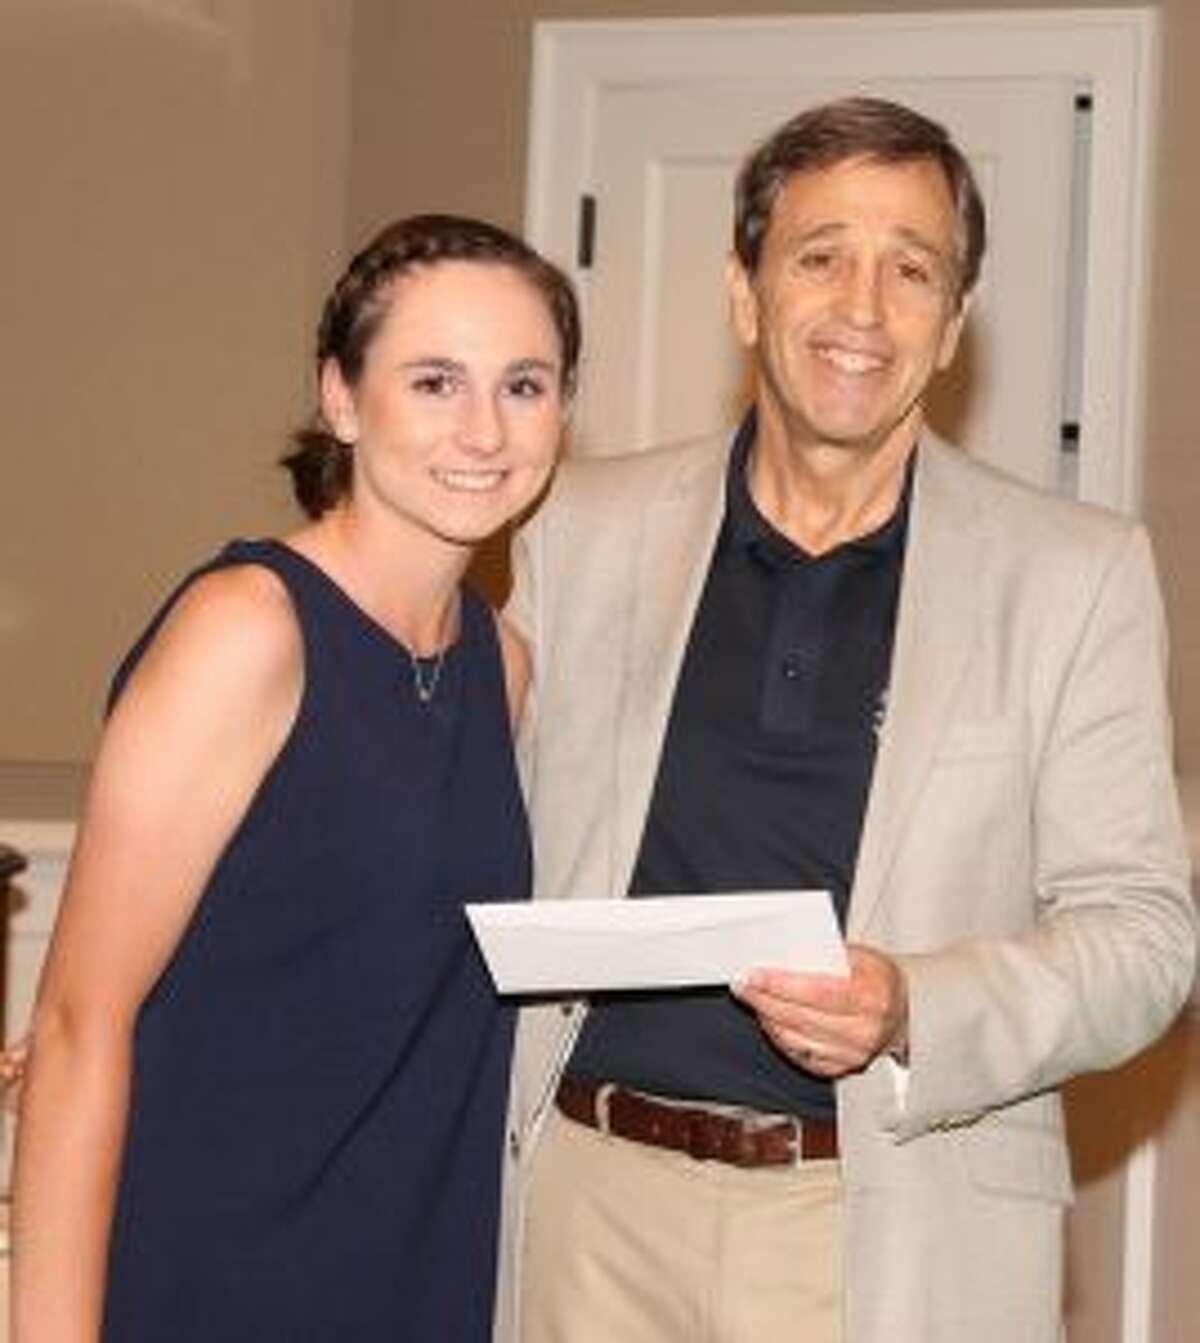 Alexa Brown, from Trumbull High School, receives a golf scholarship from Martin D. Schwartz, President and CEO of The Kennedy Center, during the Center’s Charity Golf Classic at Shorehaven Golf Club in Norwalk.